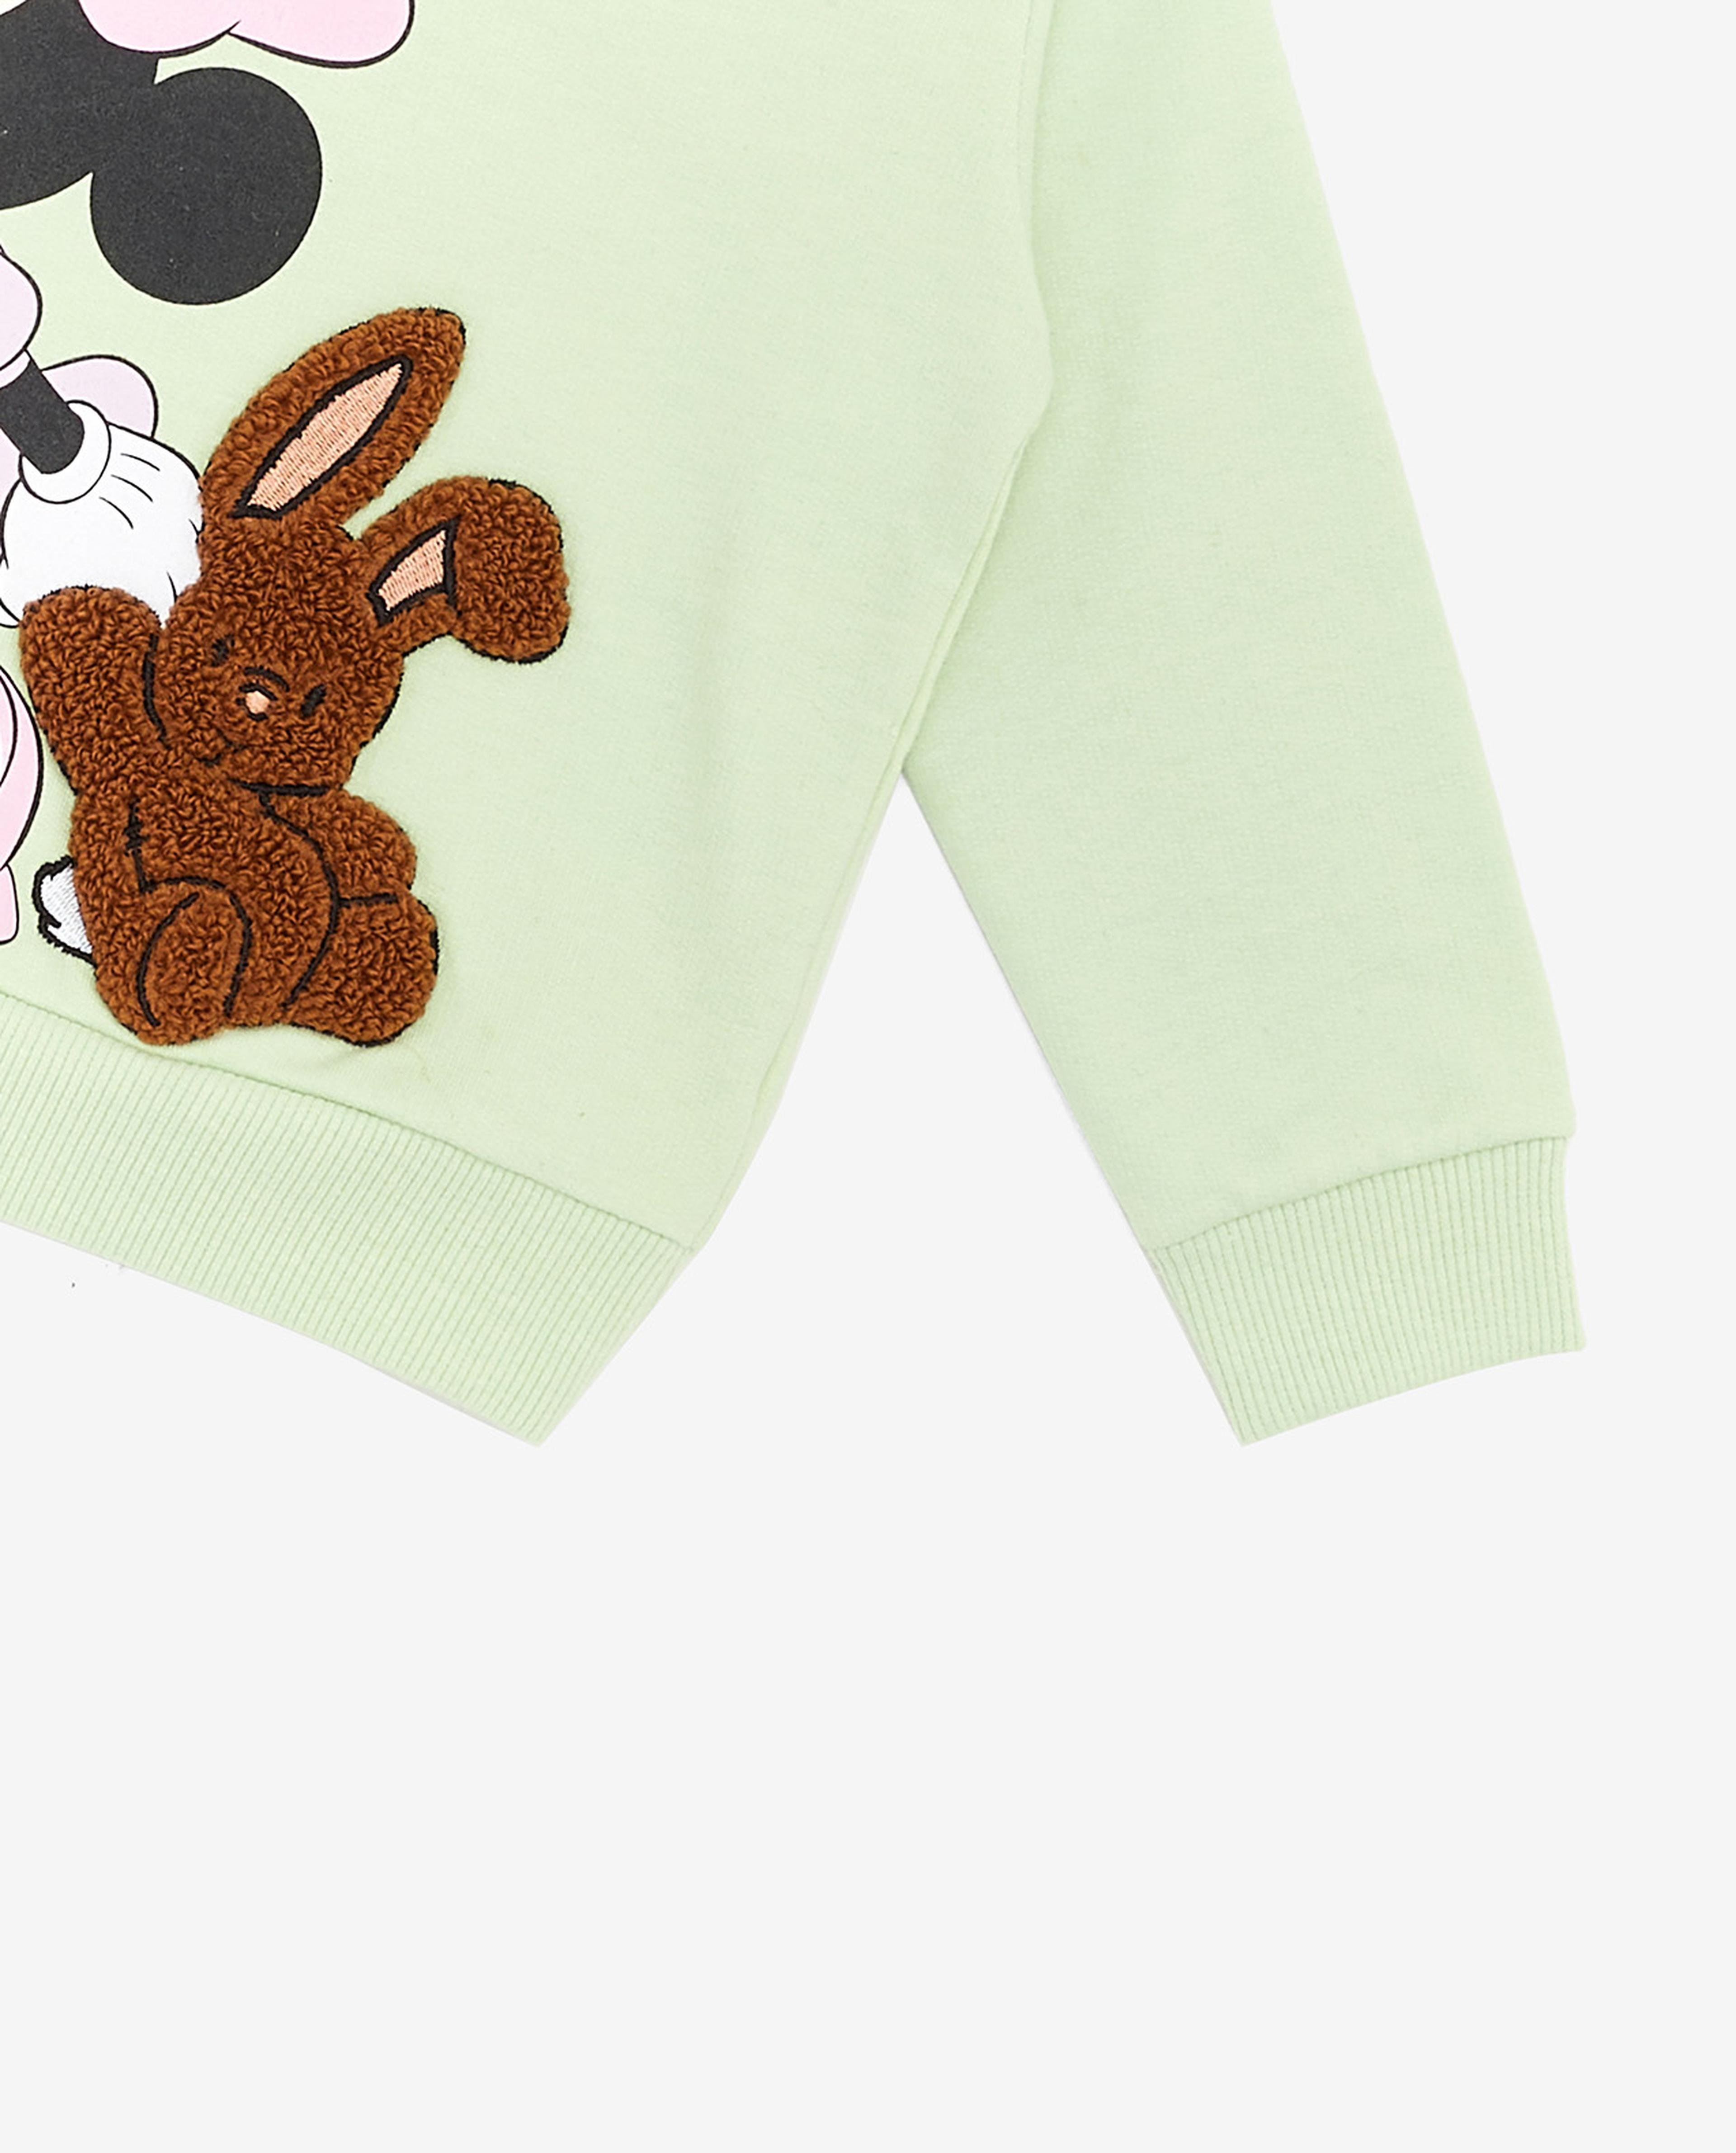 Minnie Mouse Printed Sweatshirt with Crew Neck and Long Sleeves